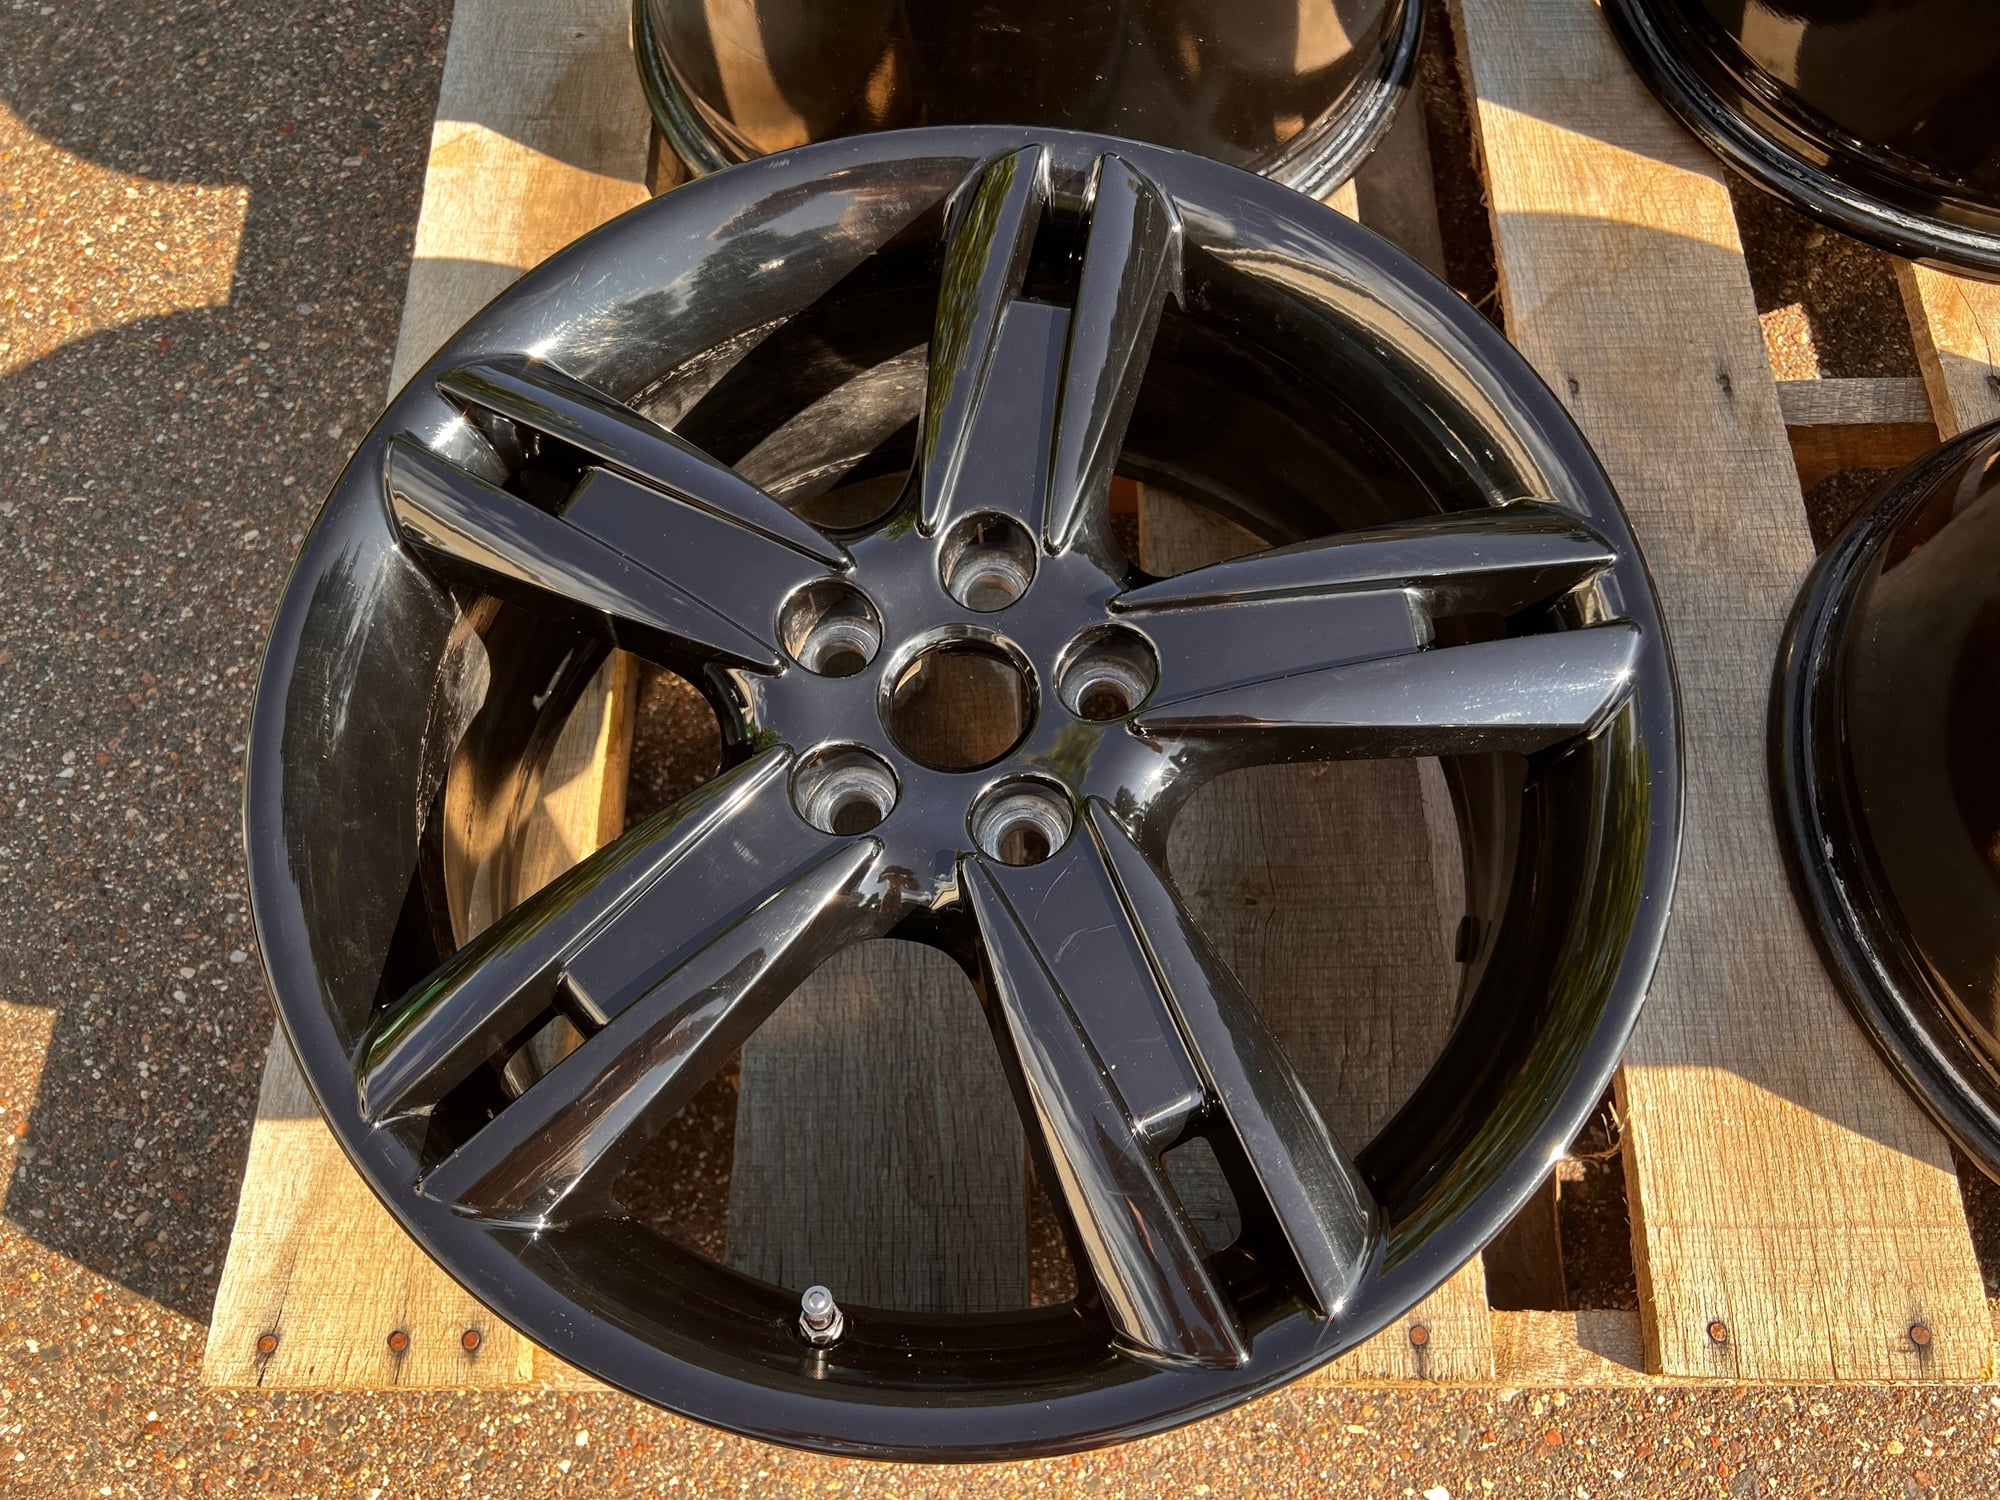 Wheels and Tires/Axles - Set of 4 STR Staggered Wheels - Used - 2000 to 2008 Jaguar S-Type - 2000 to 2006 Lincoln LS - 2002 to 2005 Ford Thunderbird - Minneapolis, MN 55402, United States